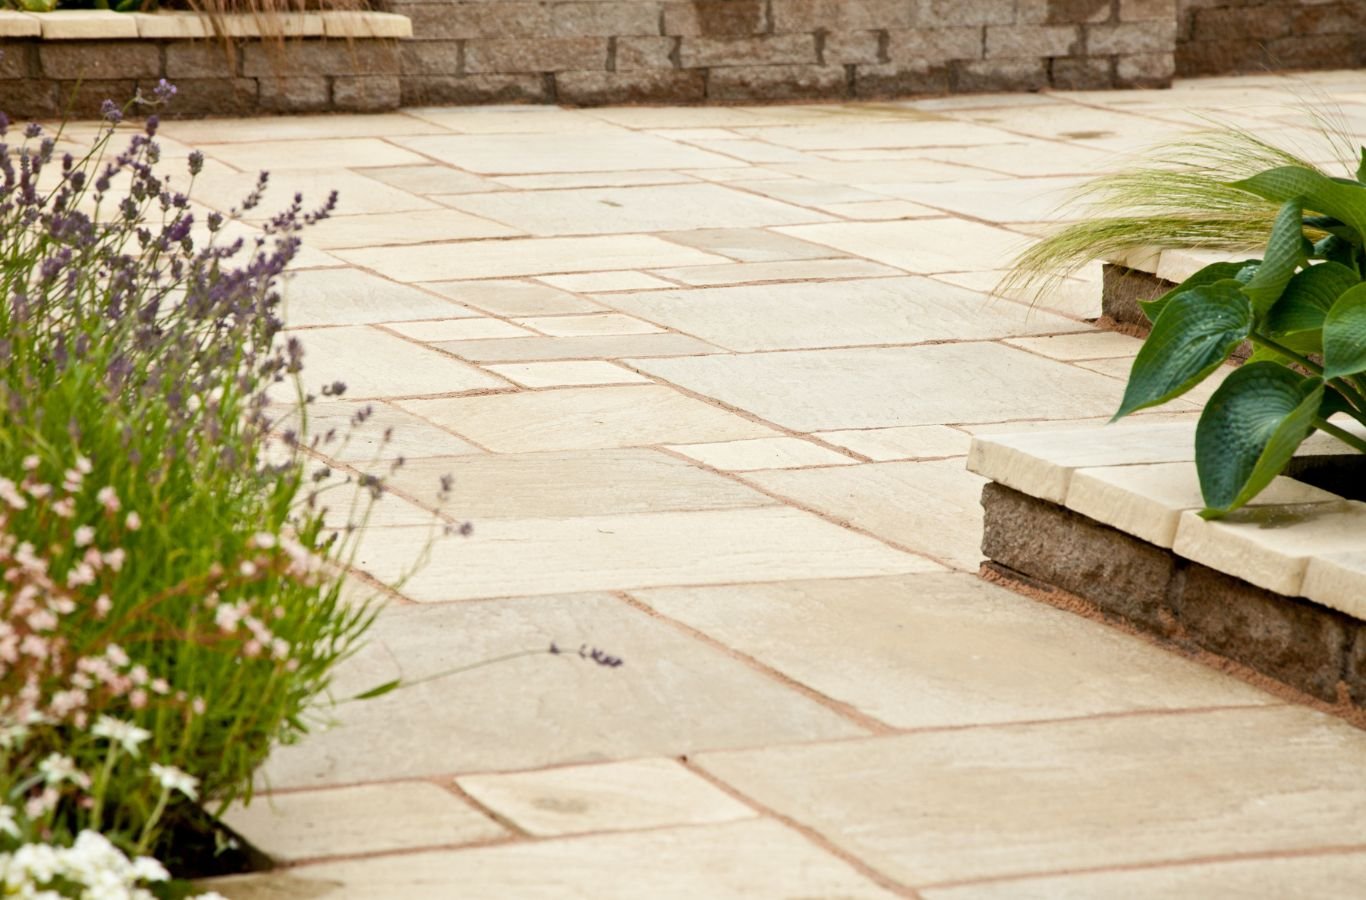 Learn why you should choose driveway paving in Vestavia Hills by FARE Outdoor Construction. Expert craftsmanship and reliable service for your paving needs. Driveway paving near me.